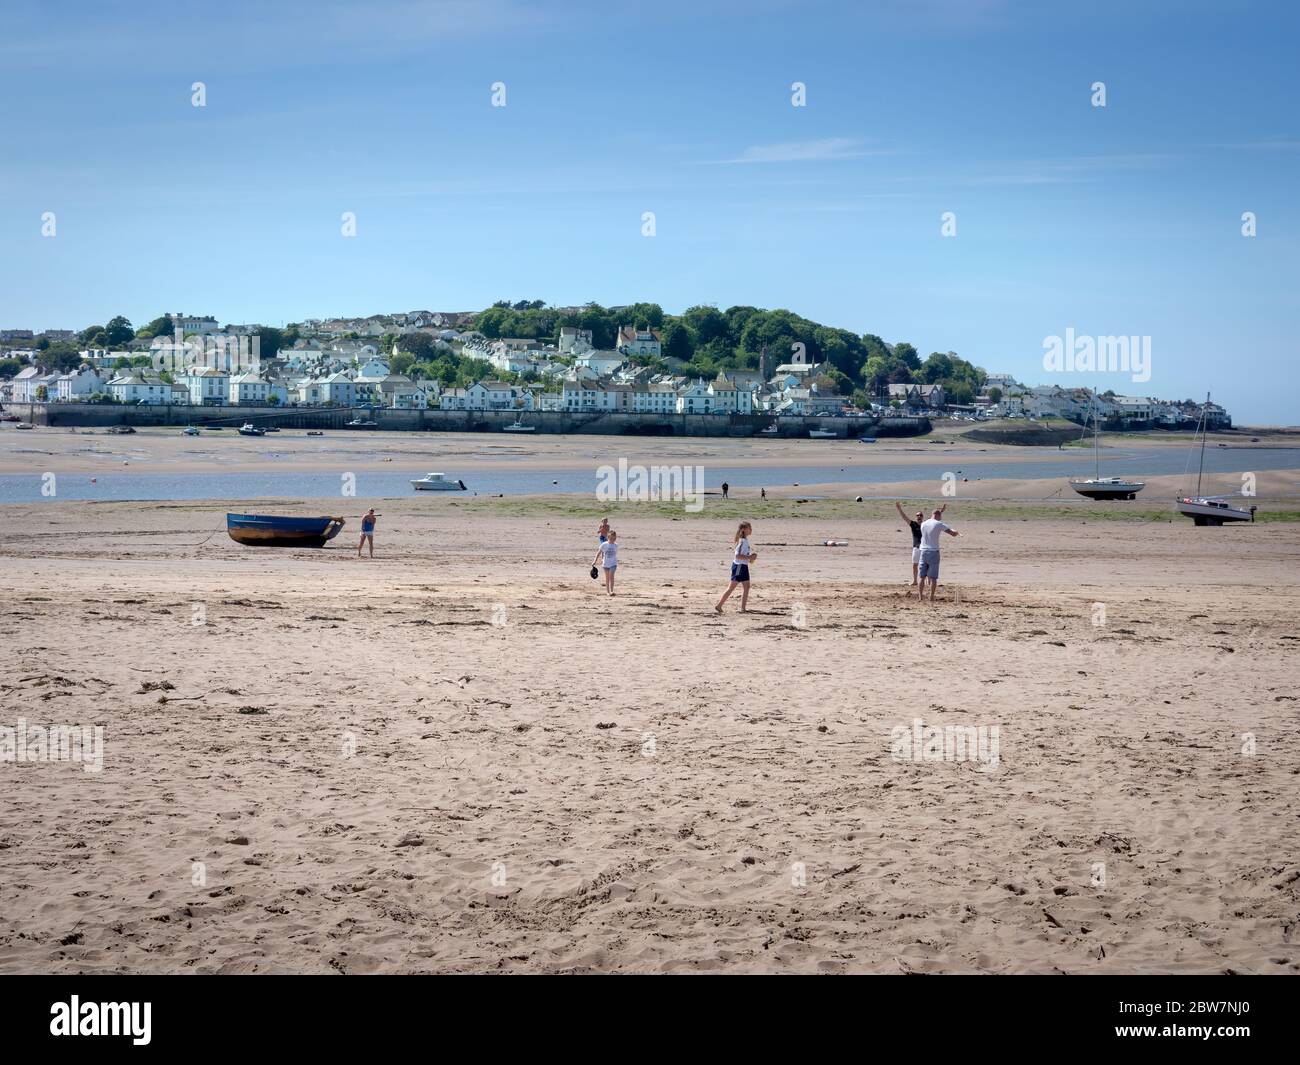 INSTOW, DEVON, UK - MAY 24 2020: Small family groups take the opportunity for exercise, fresh air and fun on the sandy beach during COVID lockdown Stock Photo